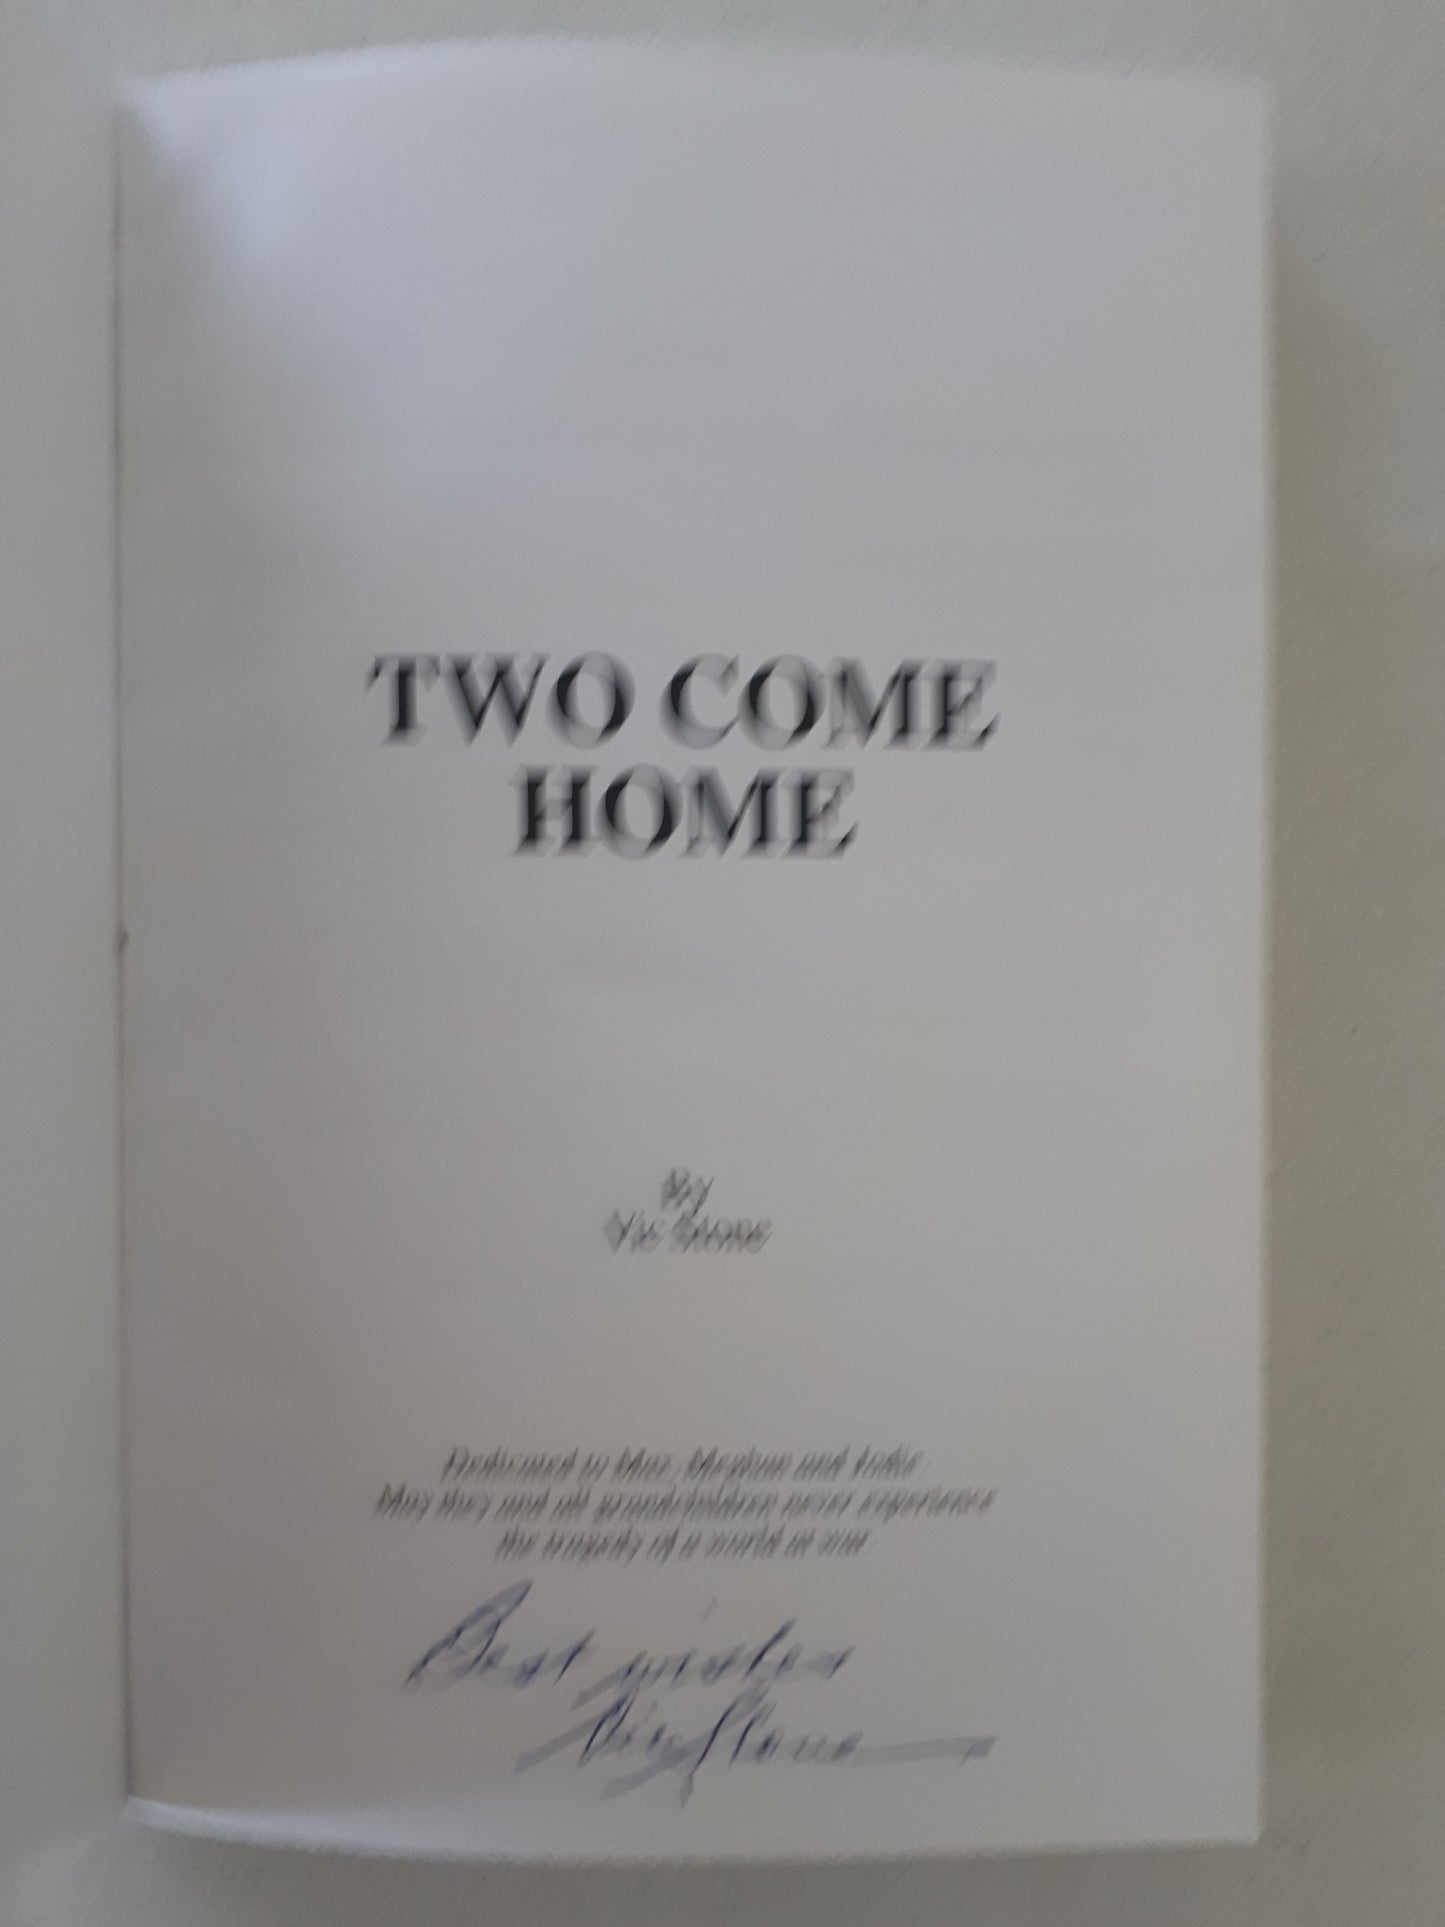 Two Come Home by Vic Stone